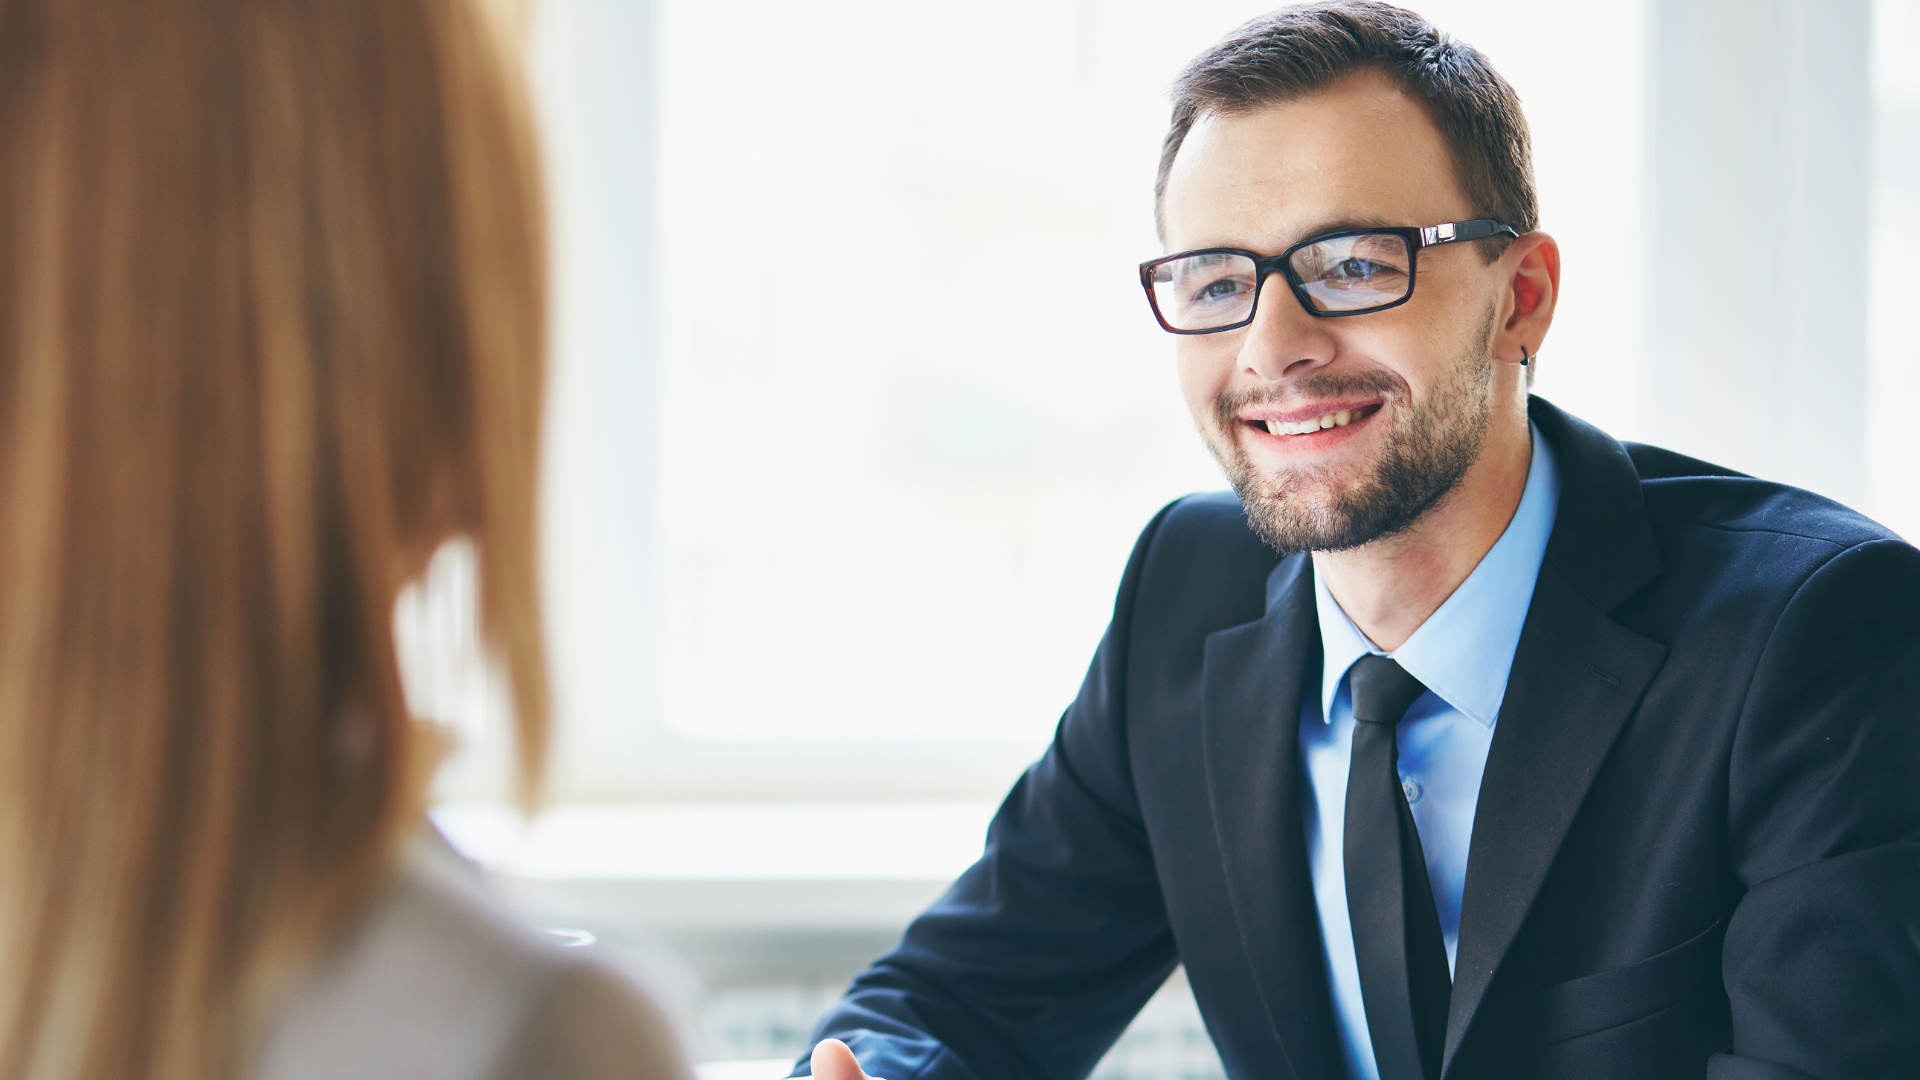 how to find a recruiter job interview